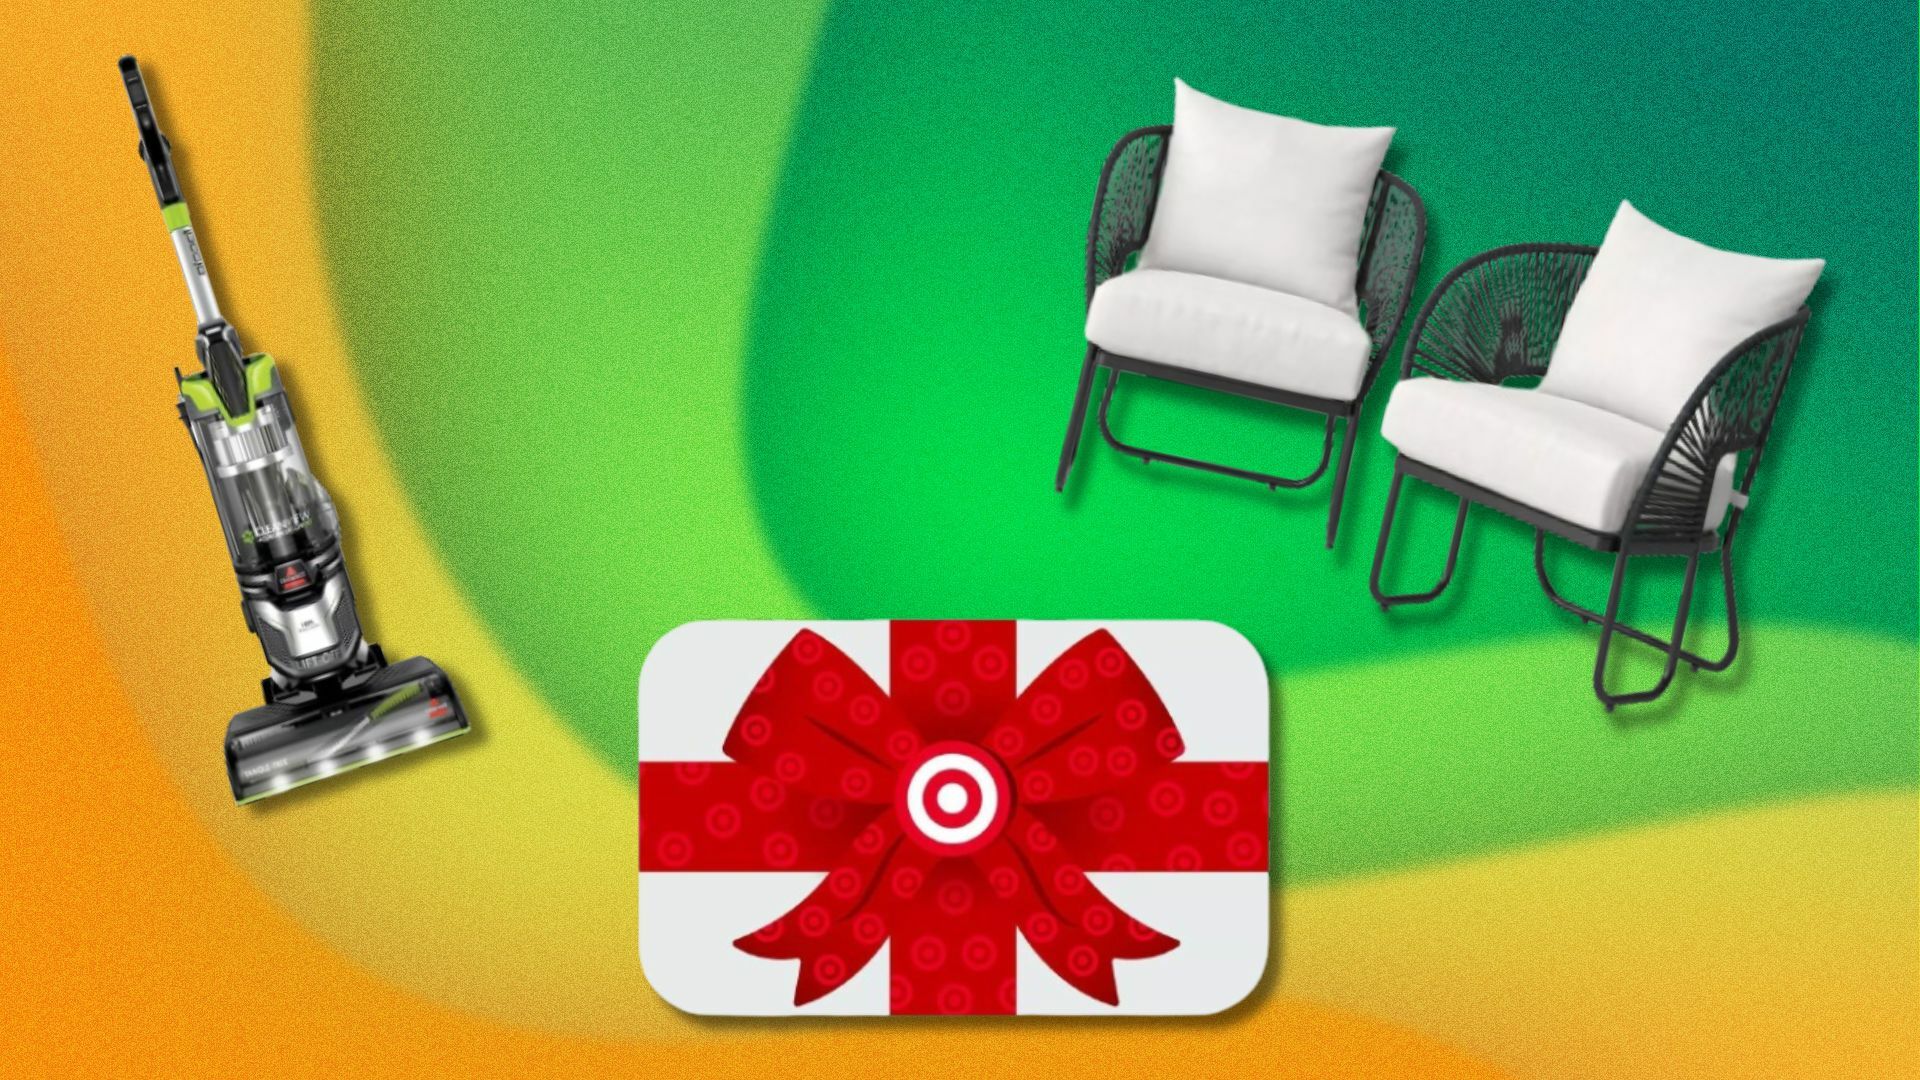 a bissell vacuum cleaner, target gift card, and outdoor patio chairs on a yellow and green wavy background